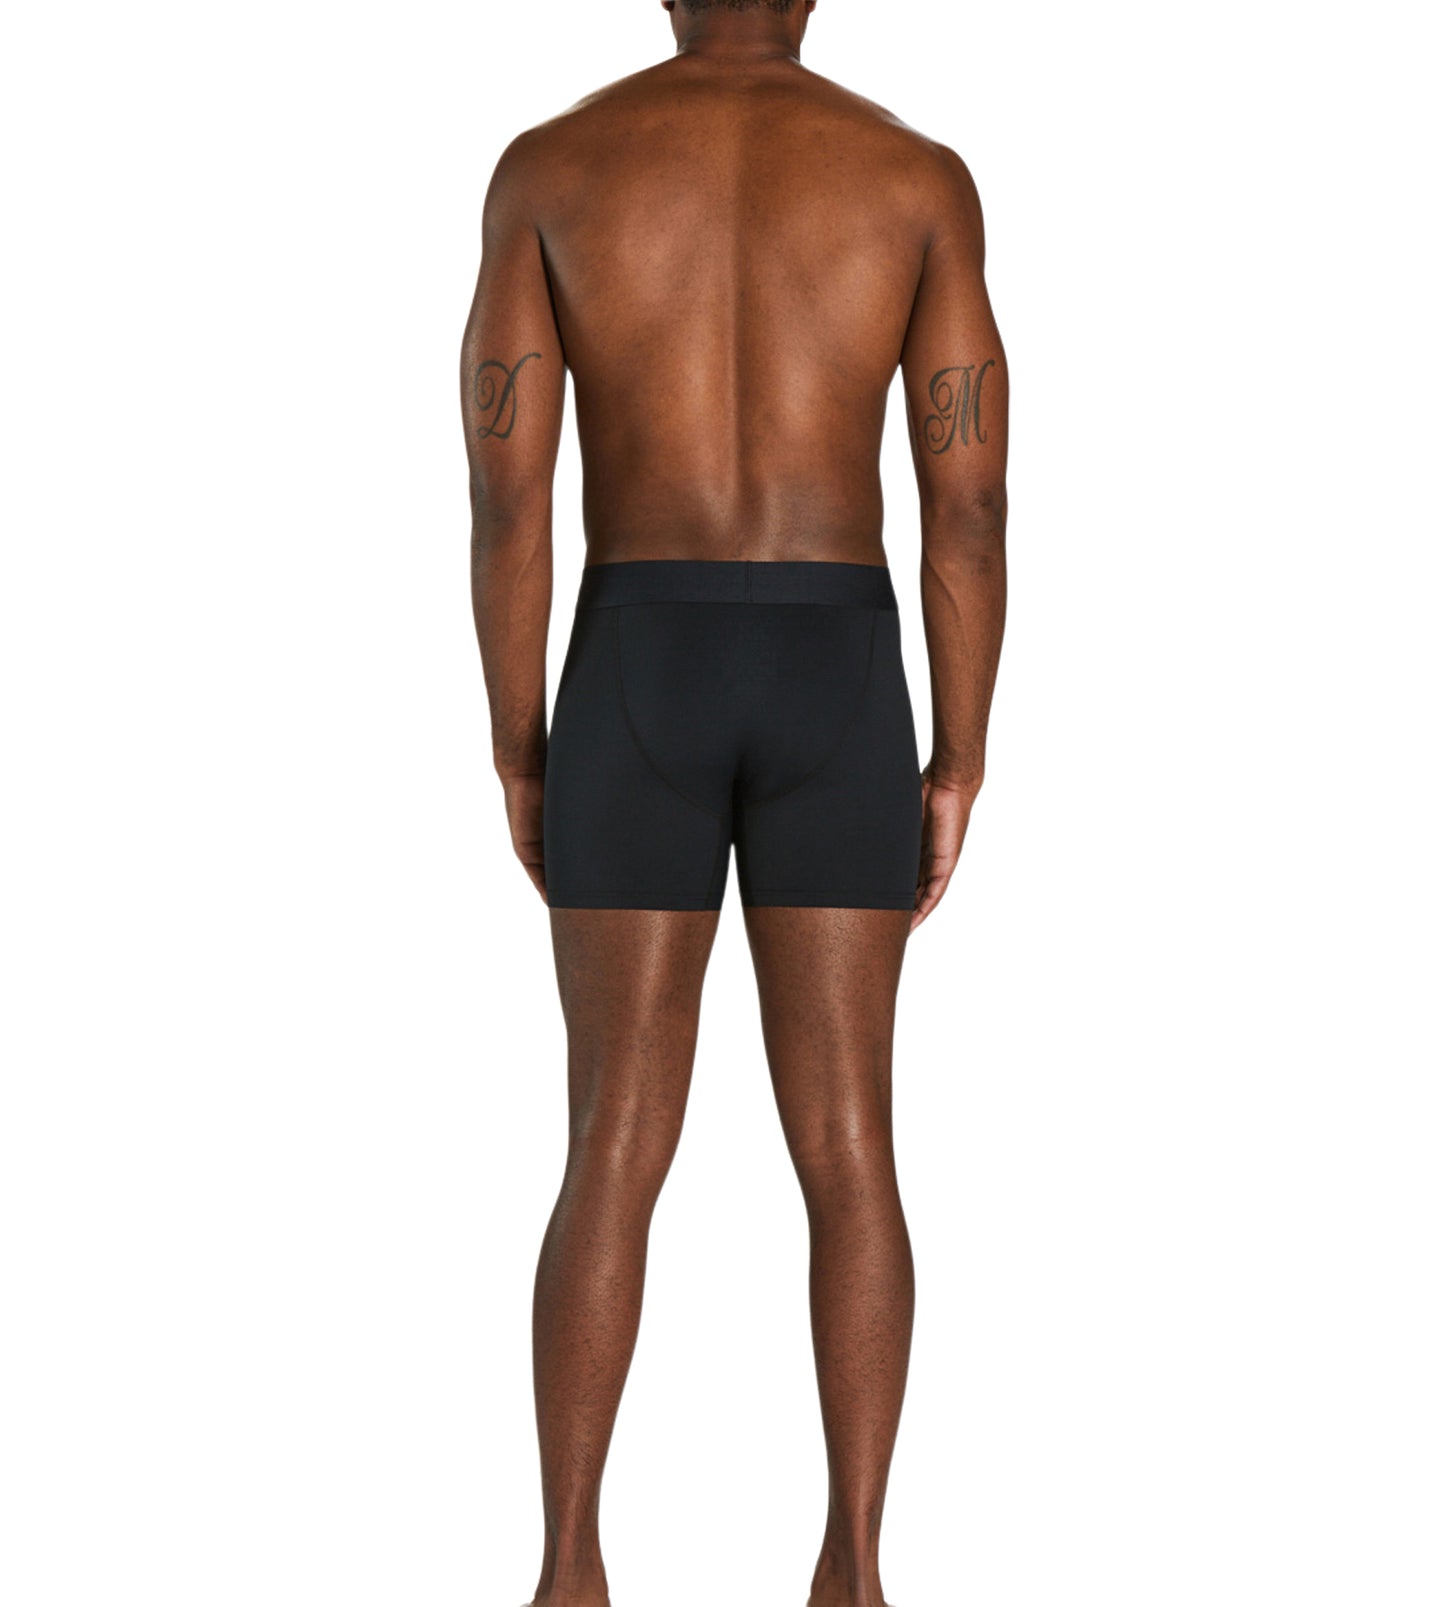 Micro-perforated solid boxer brief, Pair of Thieves, Shop Boxer Briefs  Online